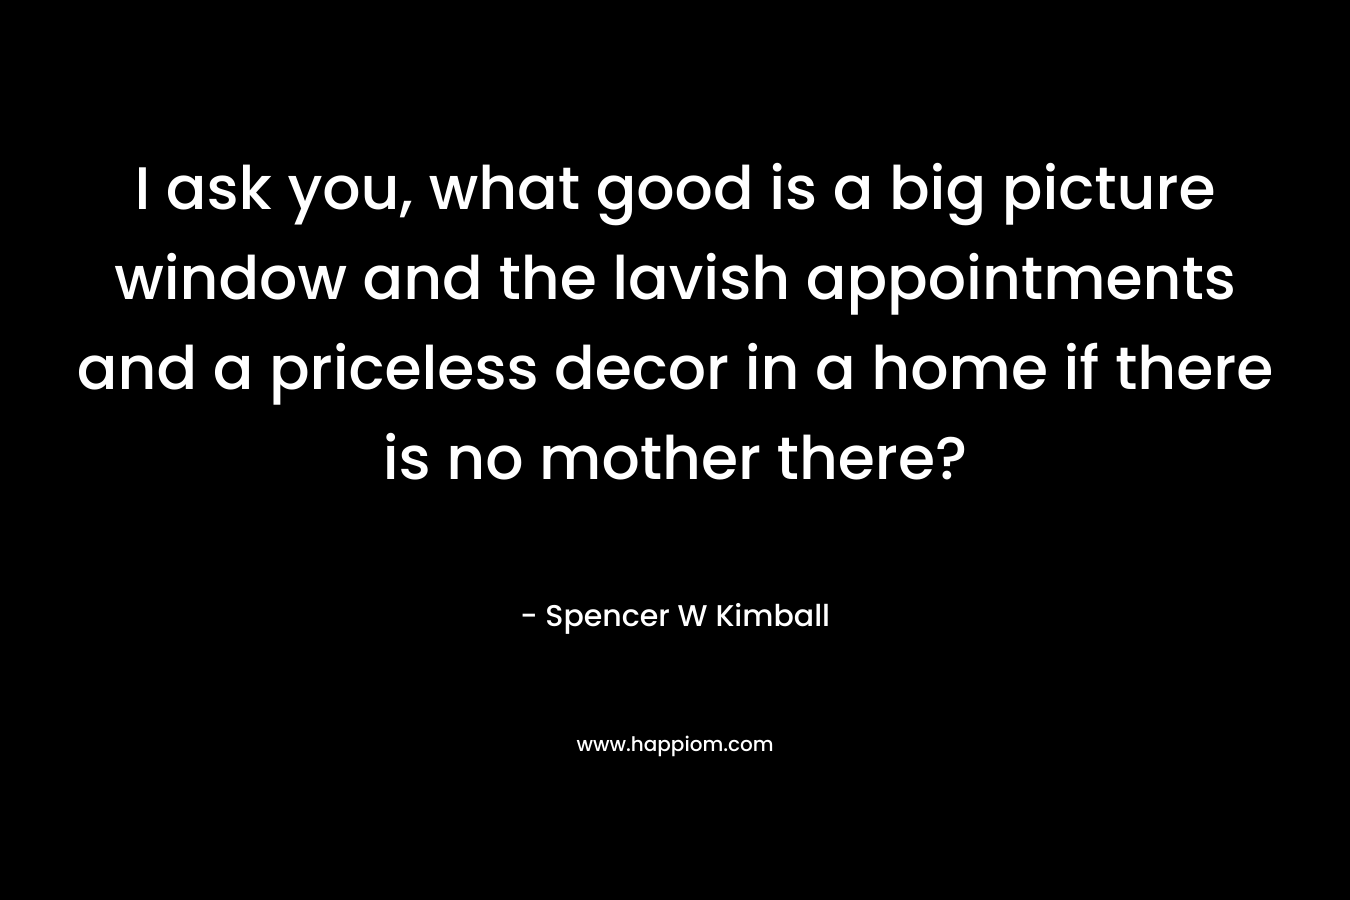 I ask you, what good is a big picture window and the lavish appointments and a priceless decor in a home if there is no mother there? – Spencer W Kimball